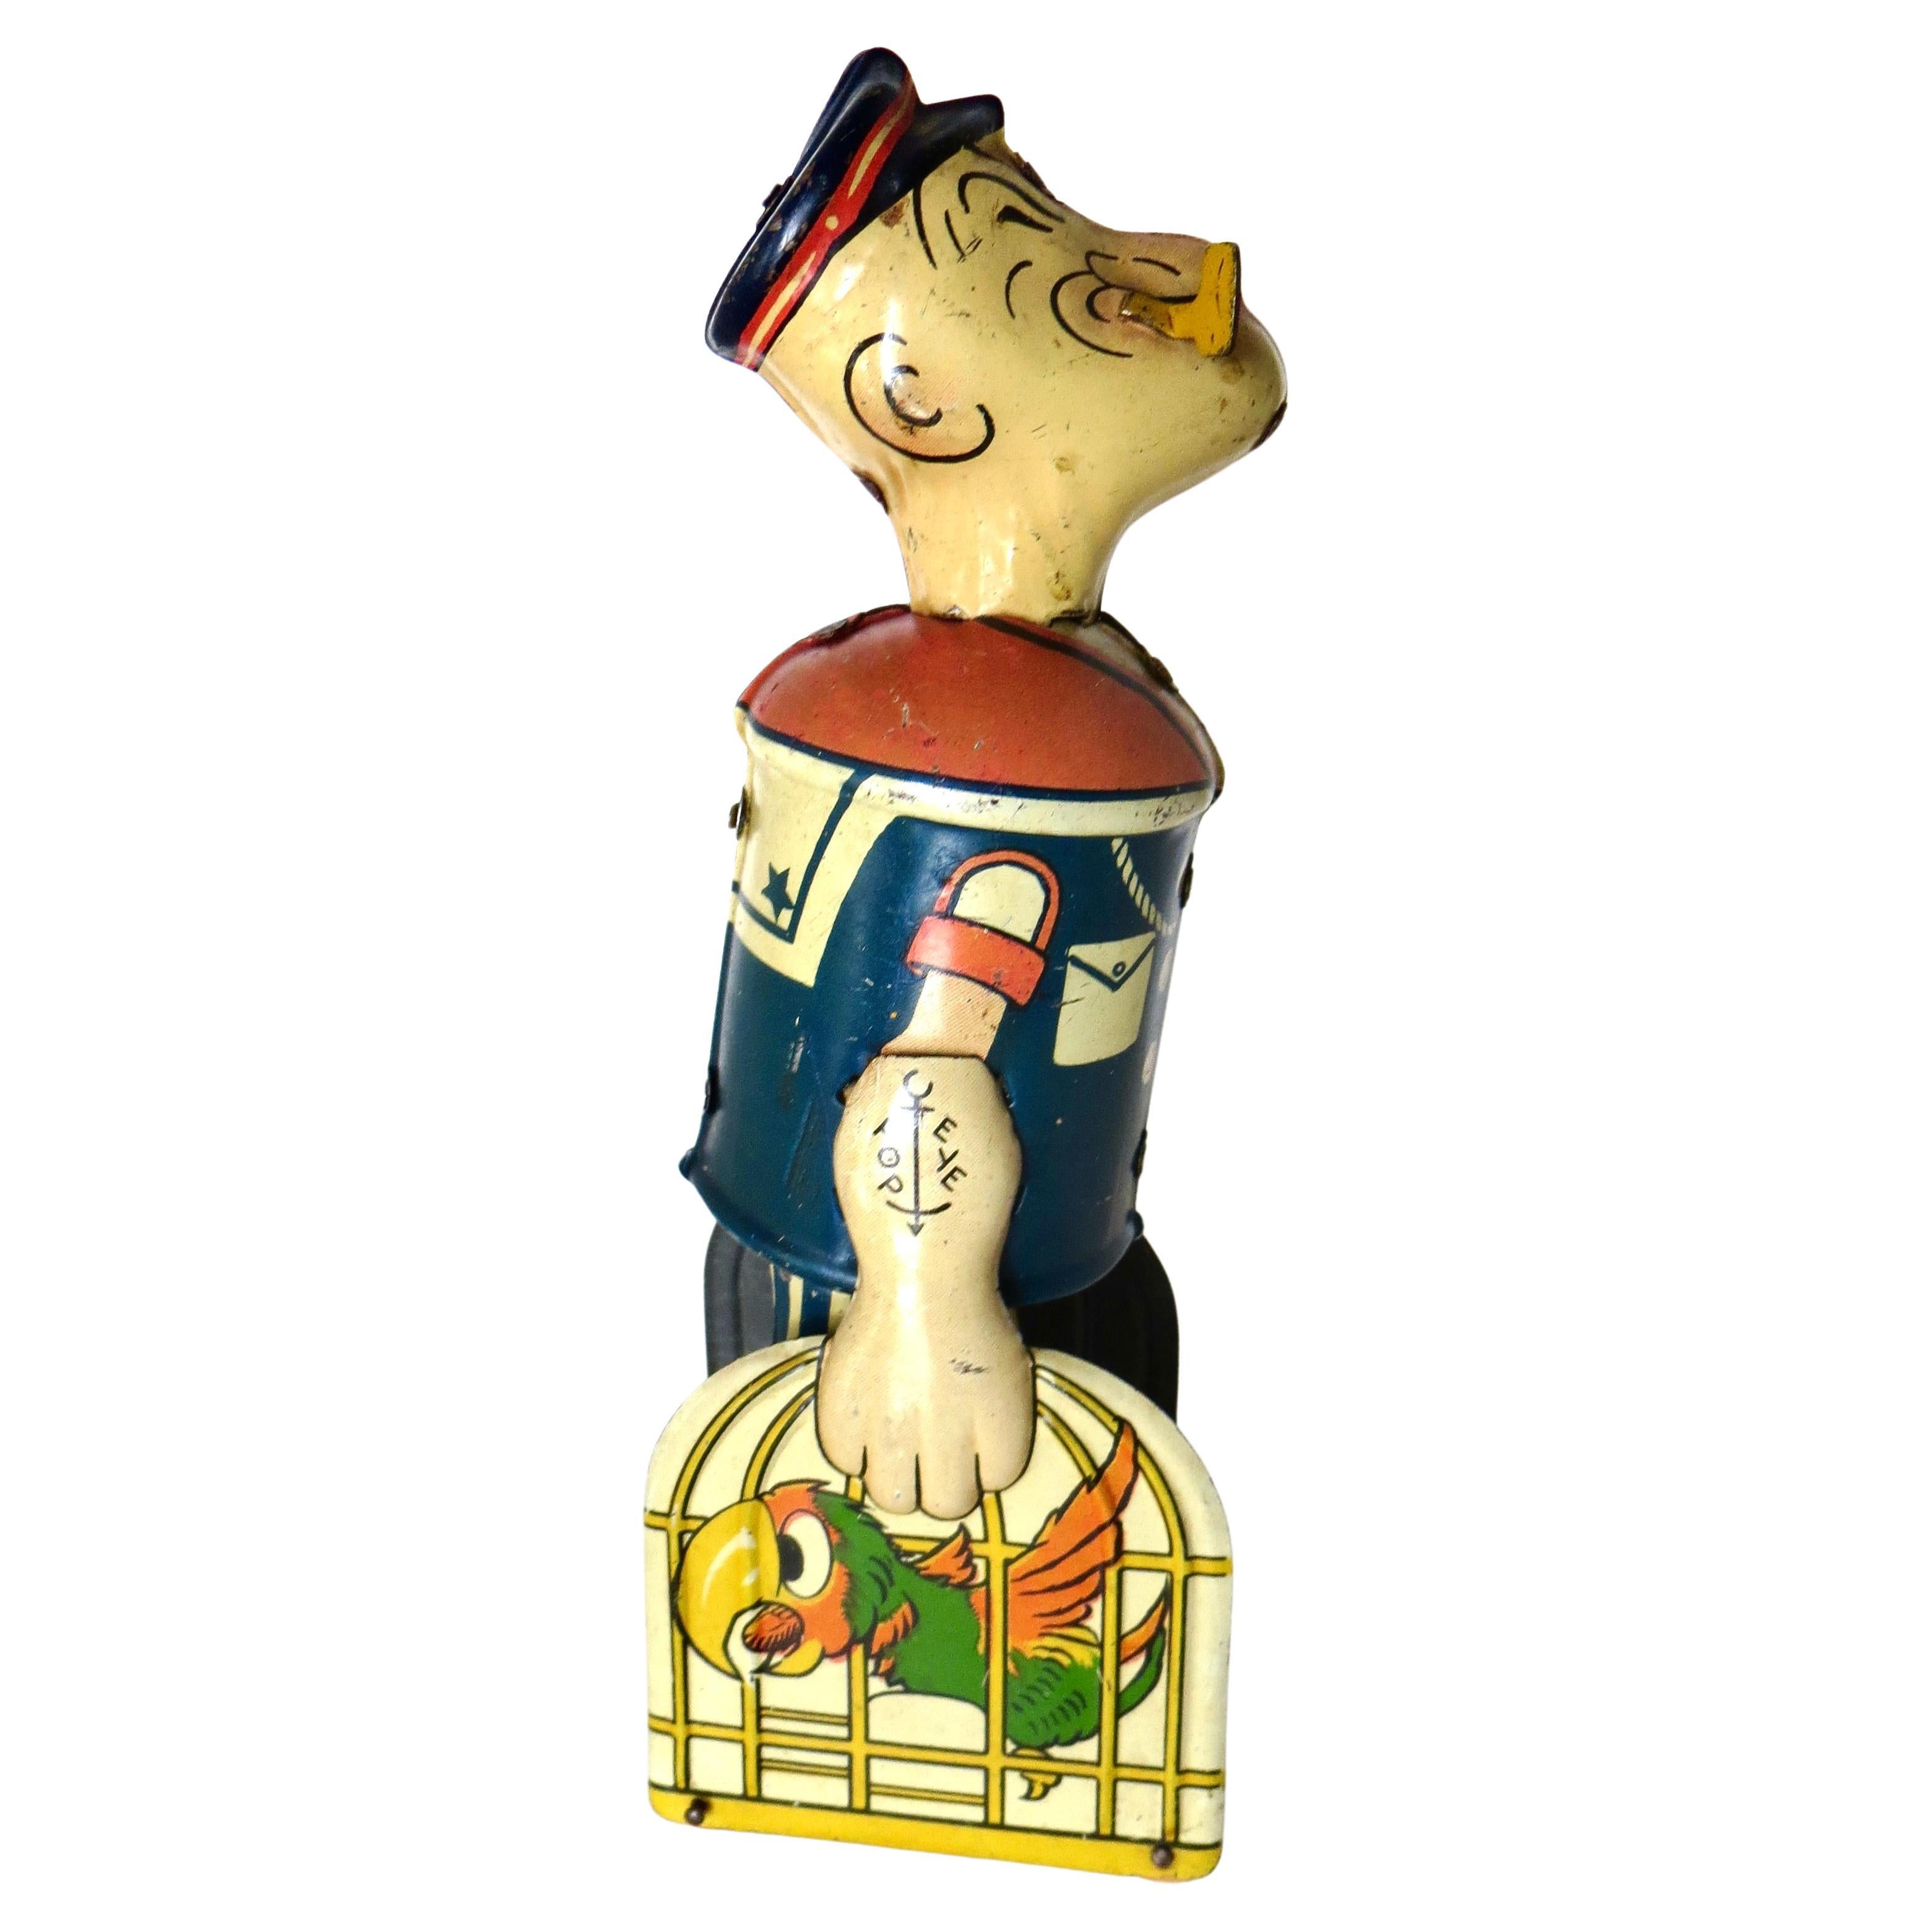 "Walking Popeye" With Parrots Vintage Windup Toy by Marx Toy Co. For Sale